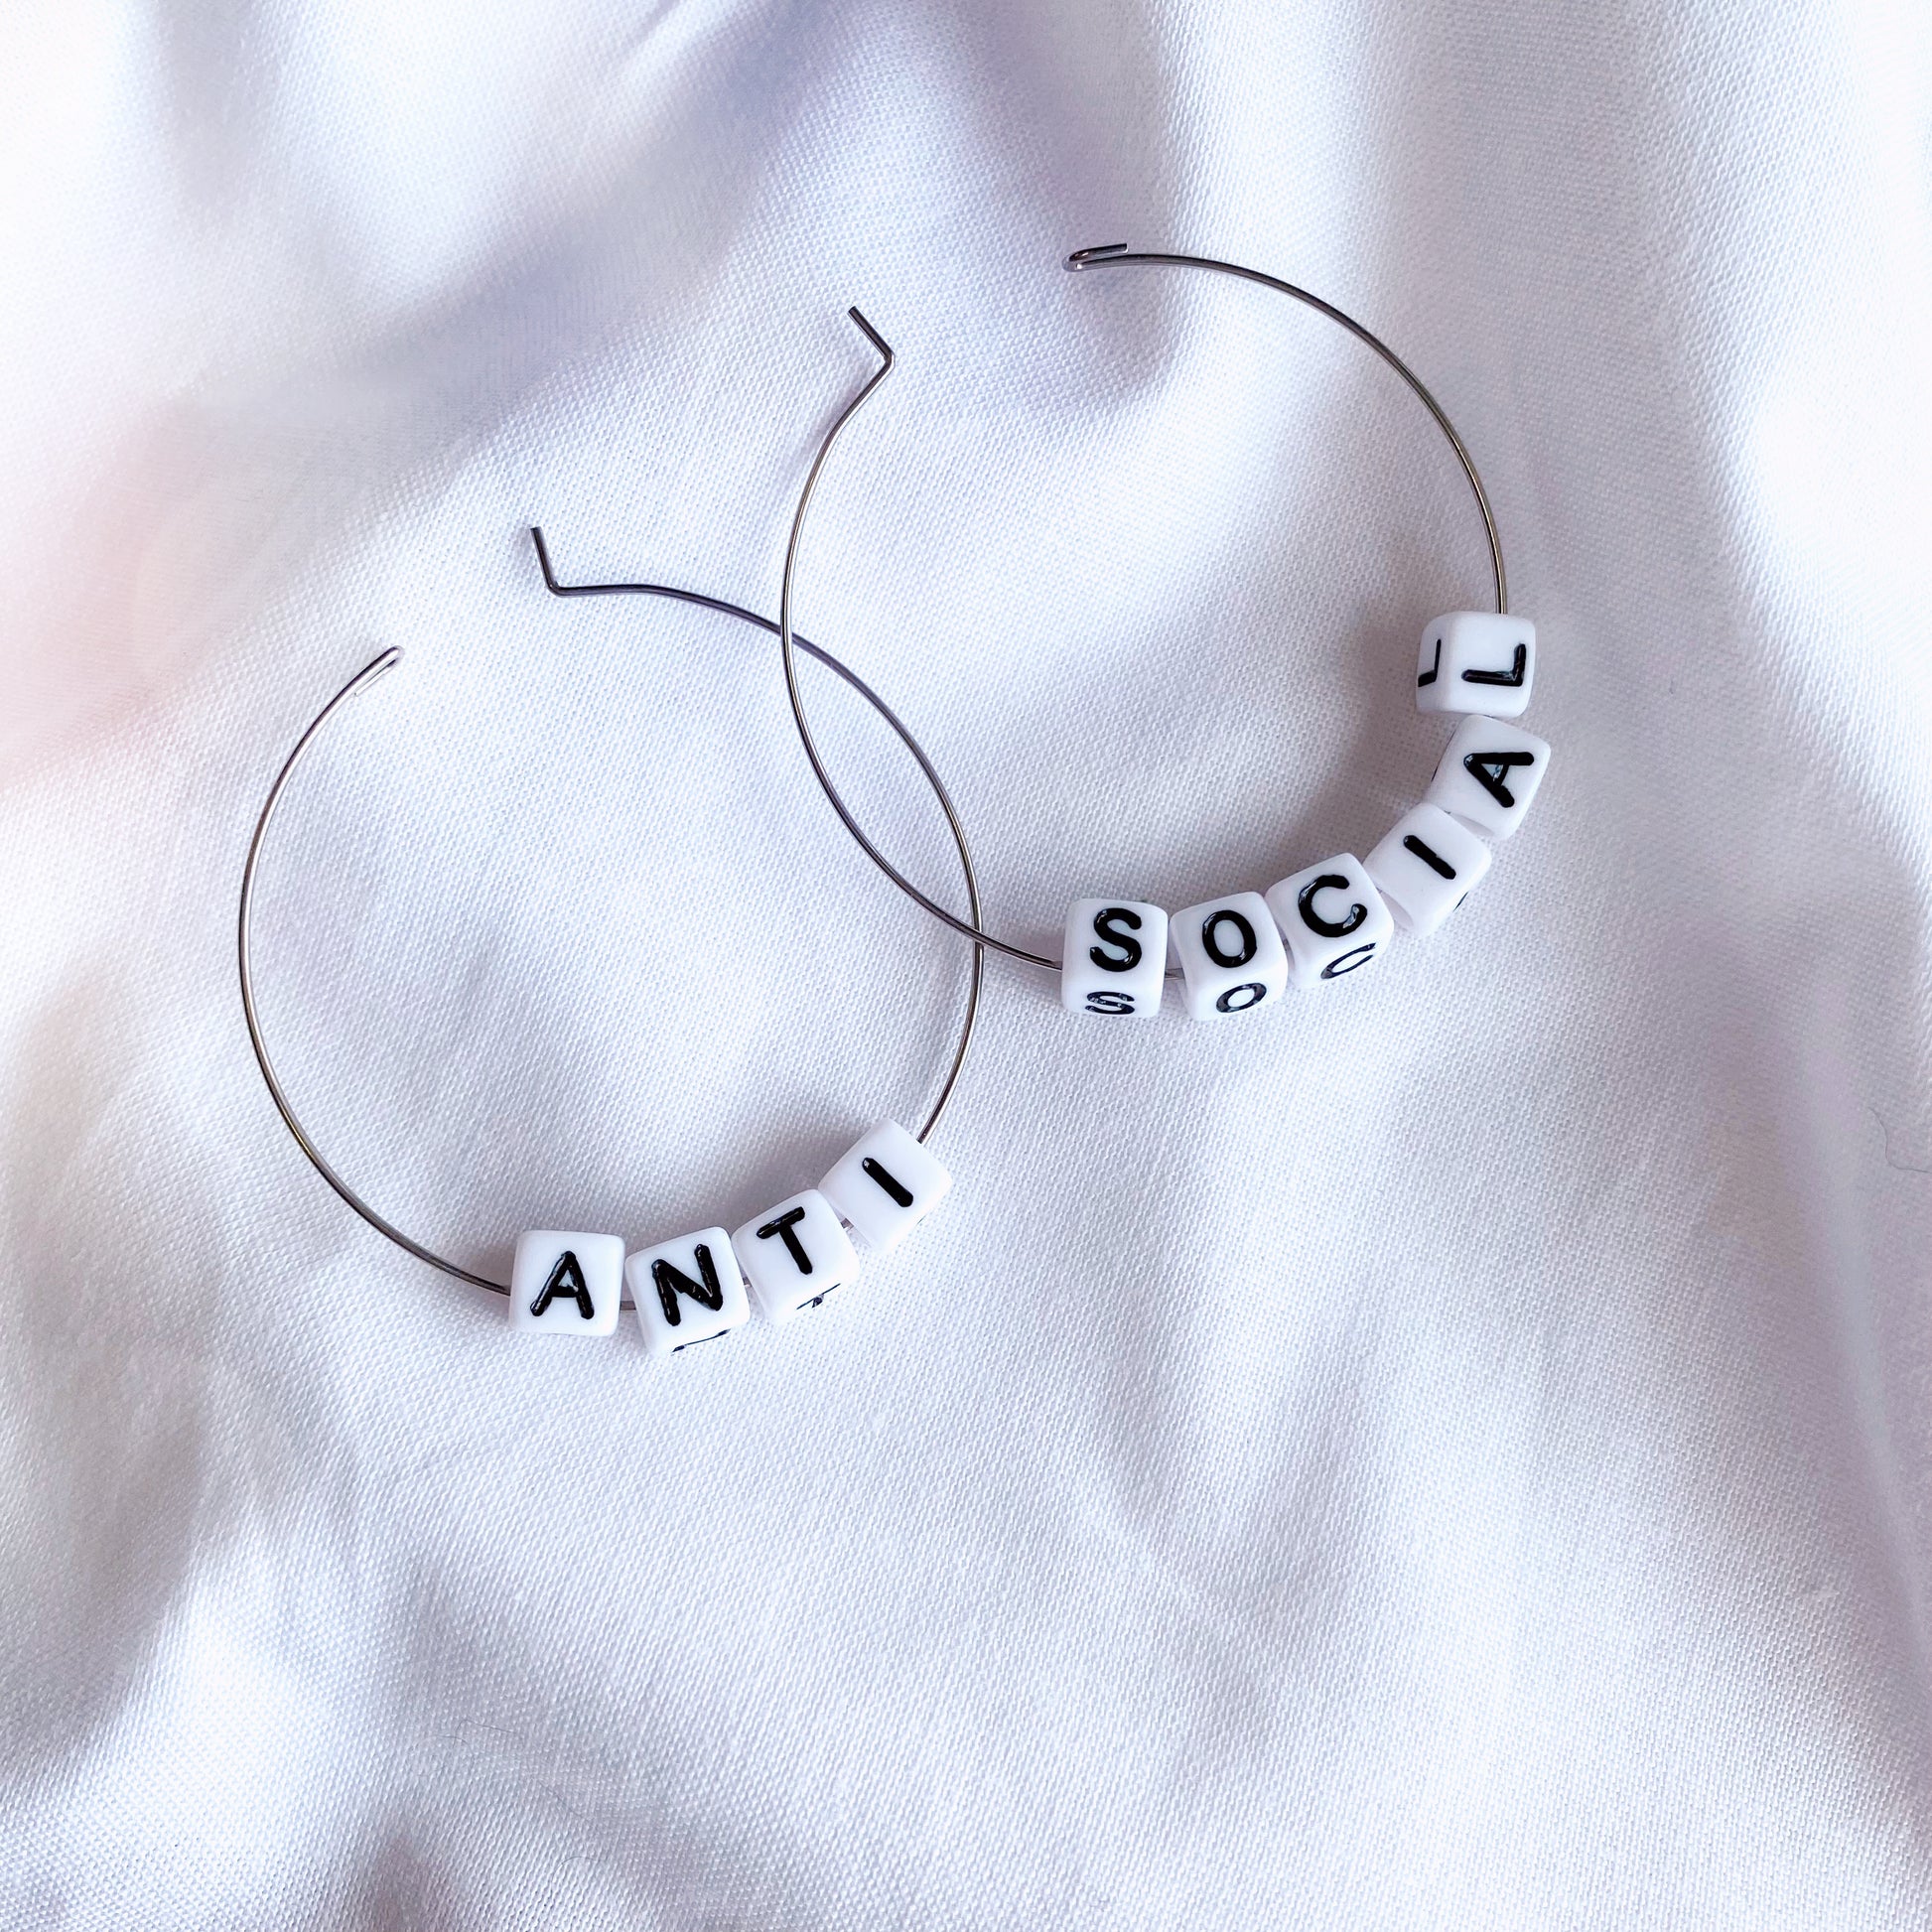 available on a gold or silver hoop, these earrings are funny and silly with the words anti-social